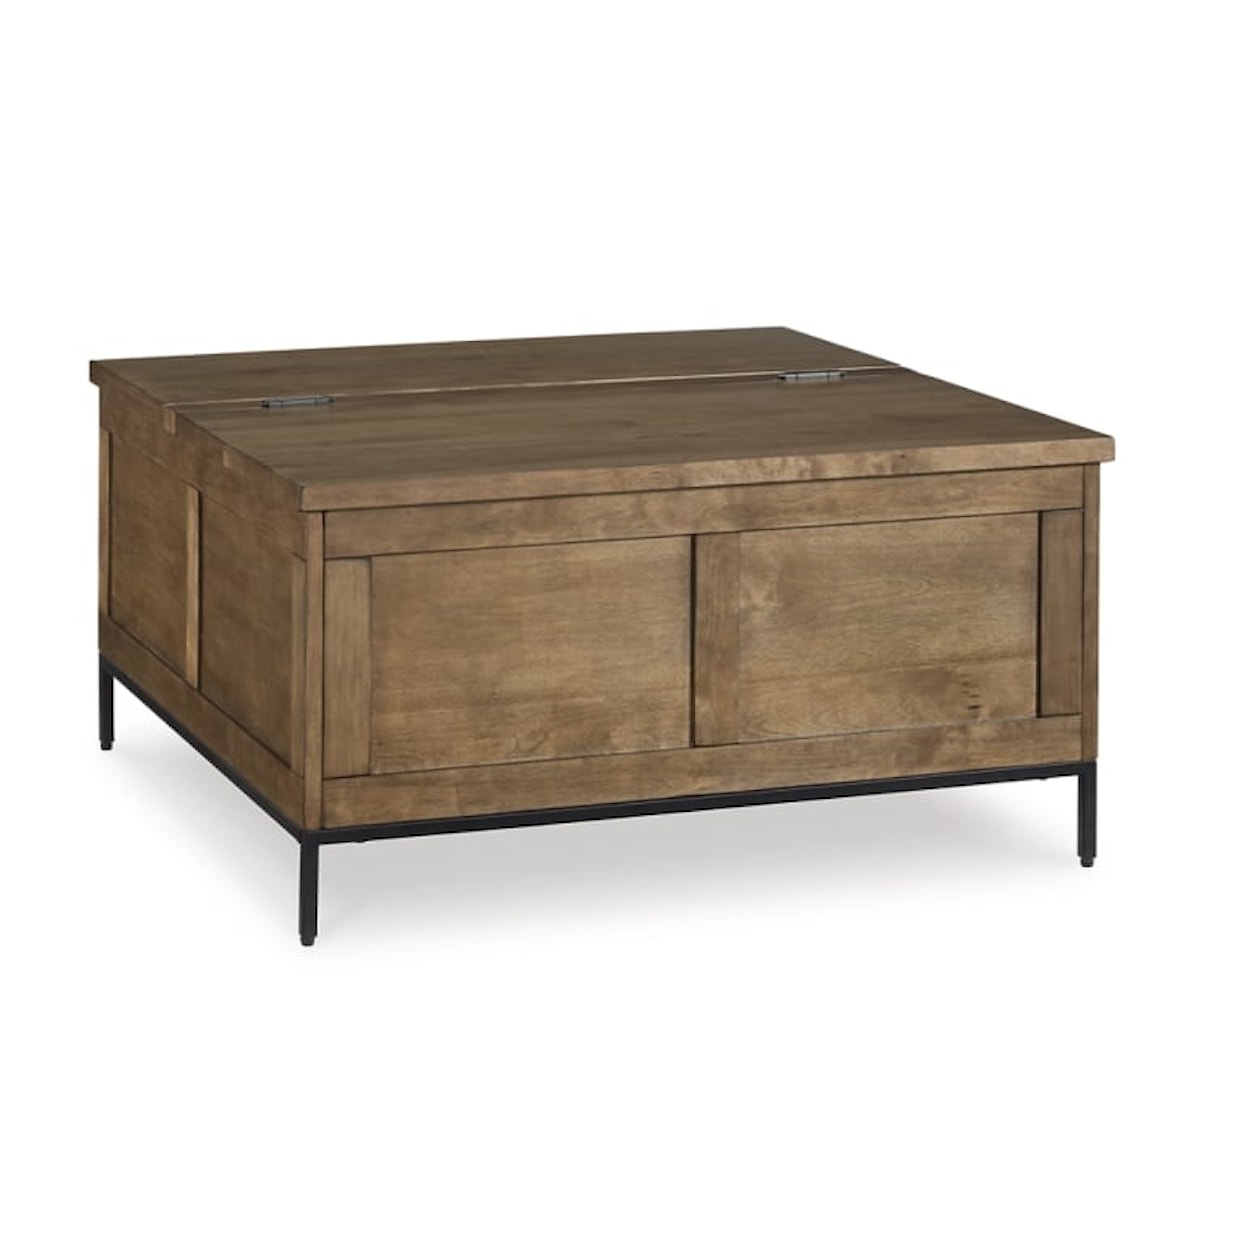 Signature Design by Ashley Torlanta Lift-Top Coffee Table